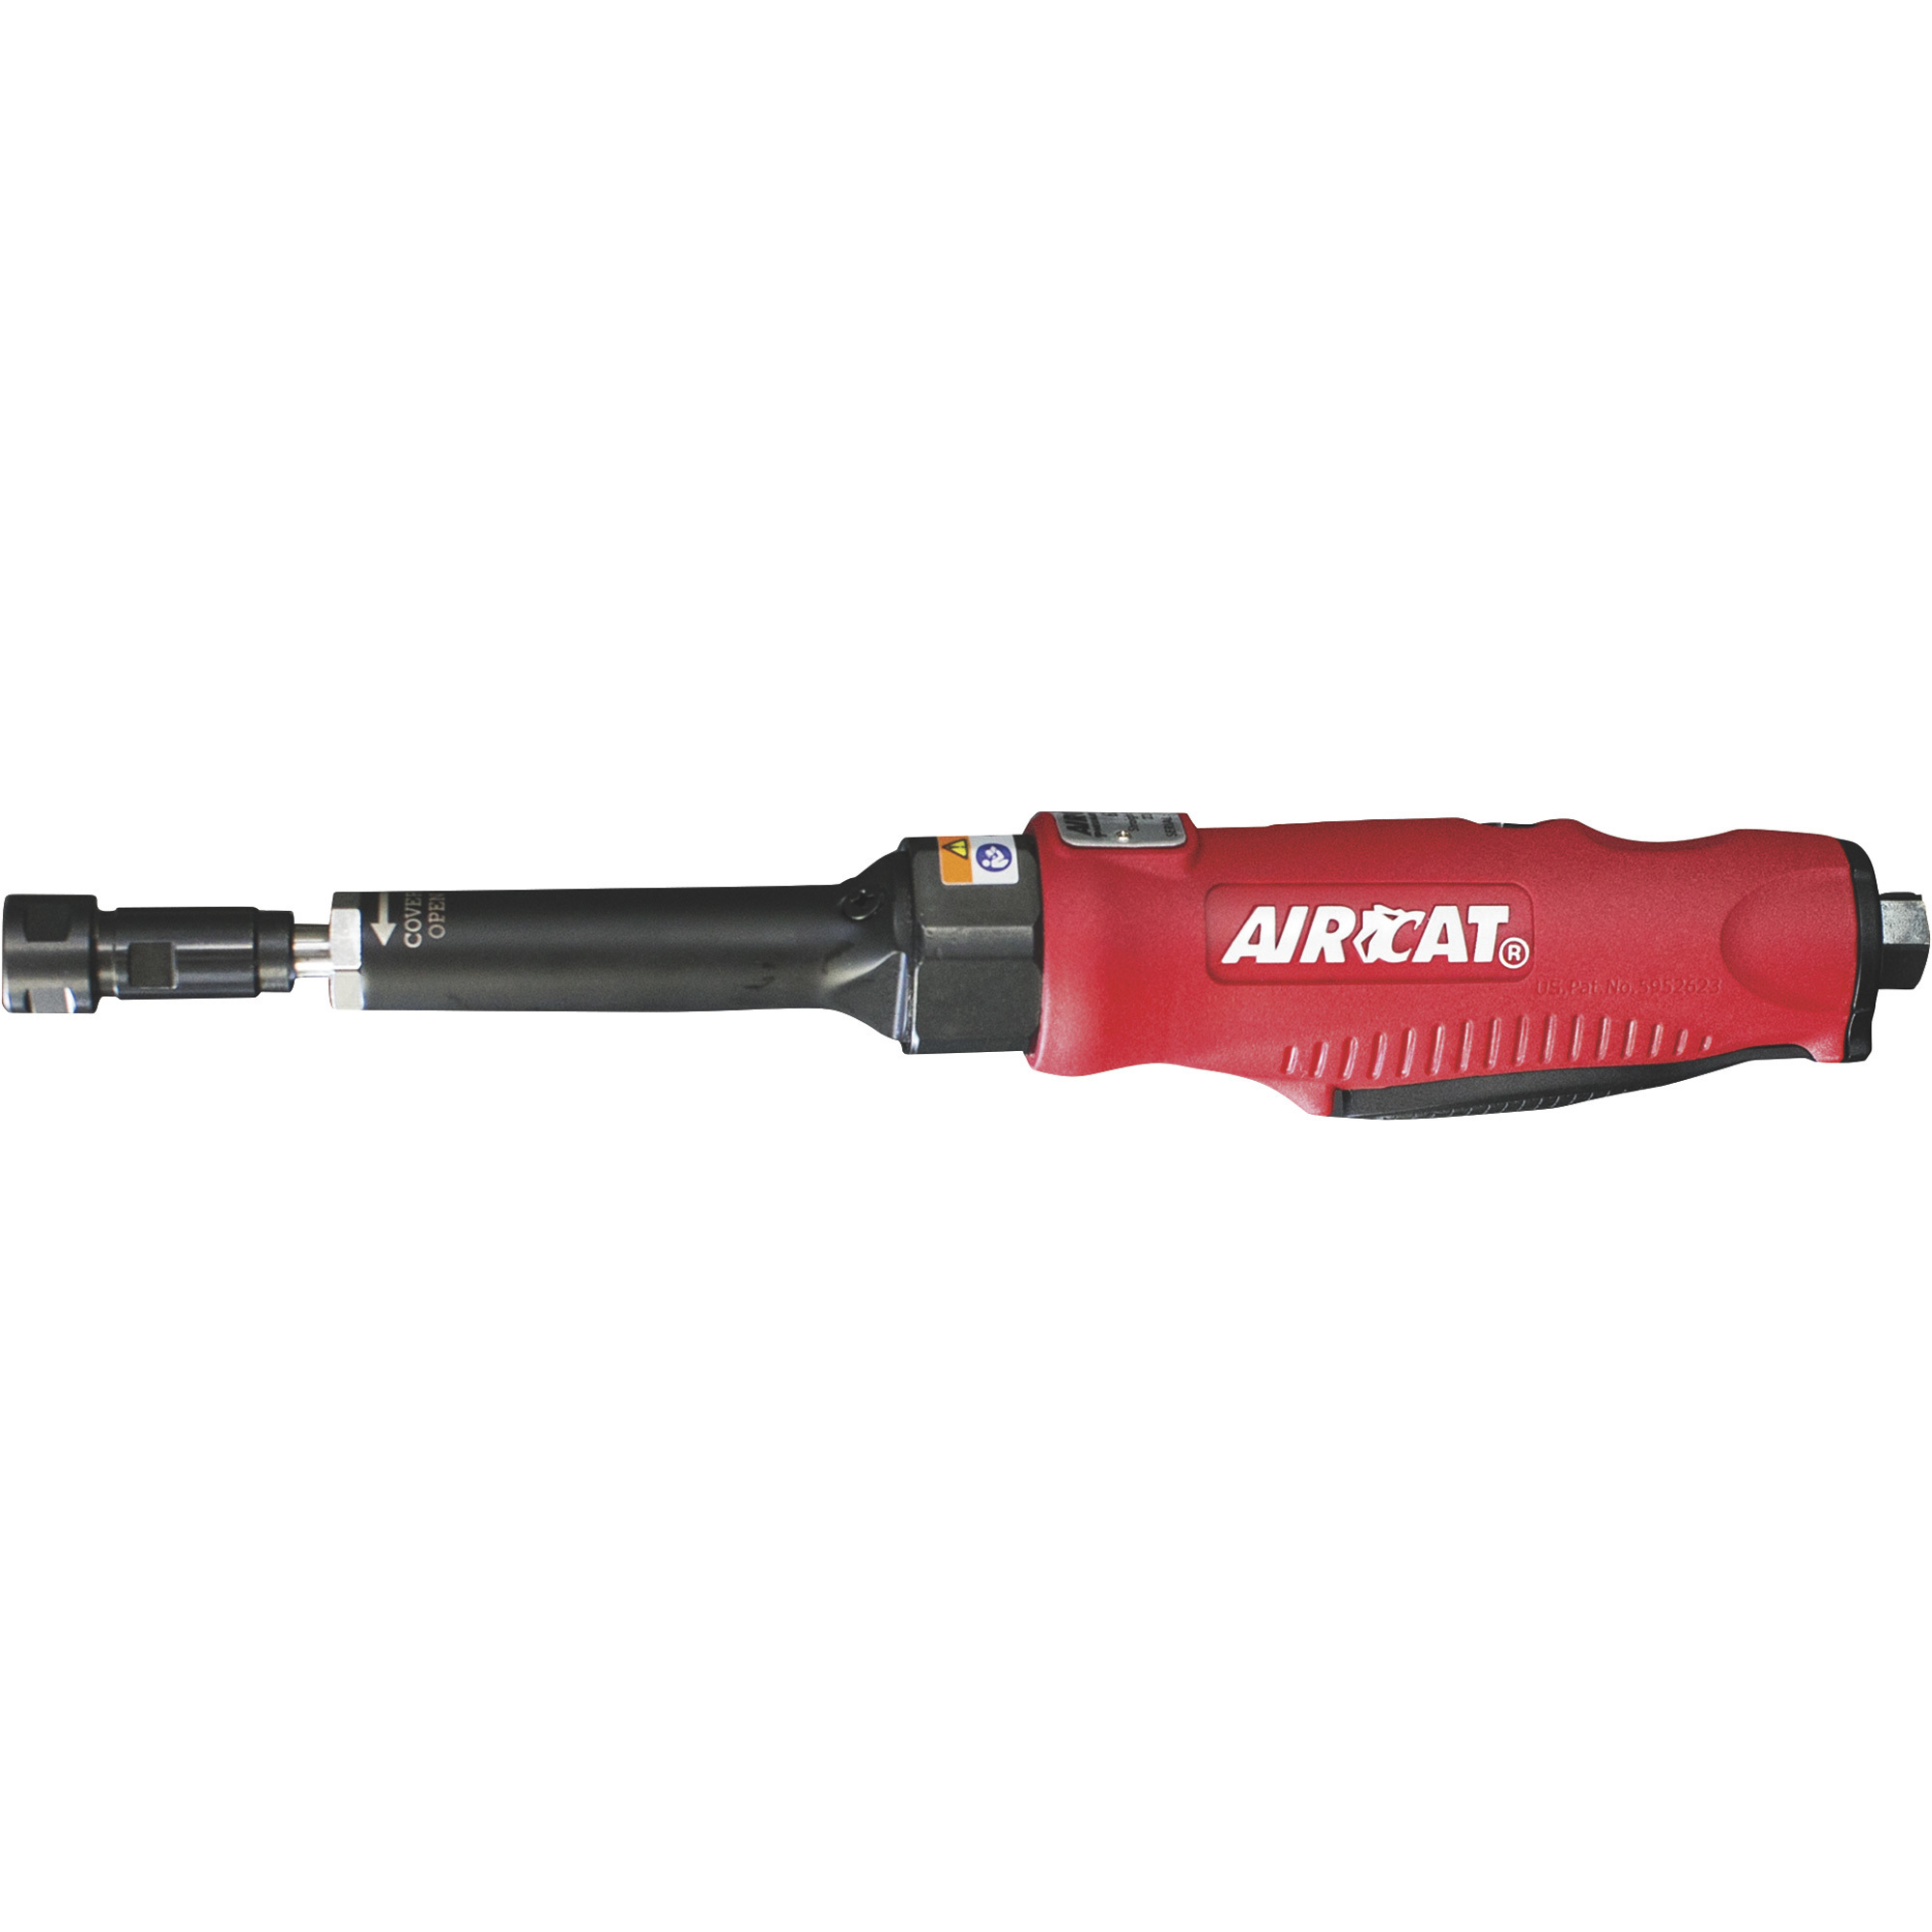 AIRCAT Composite Extended Shank Straight Air Die Grinder â 1/4Inch Collet, 22,000 RPM, Model 6210